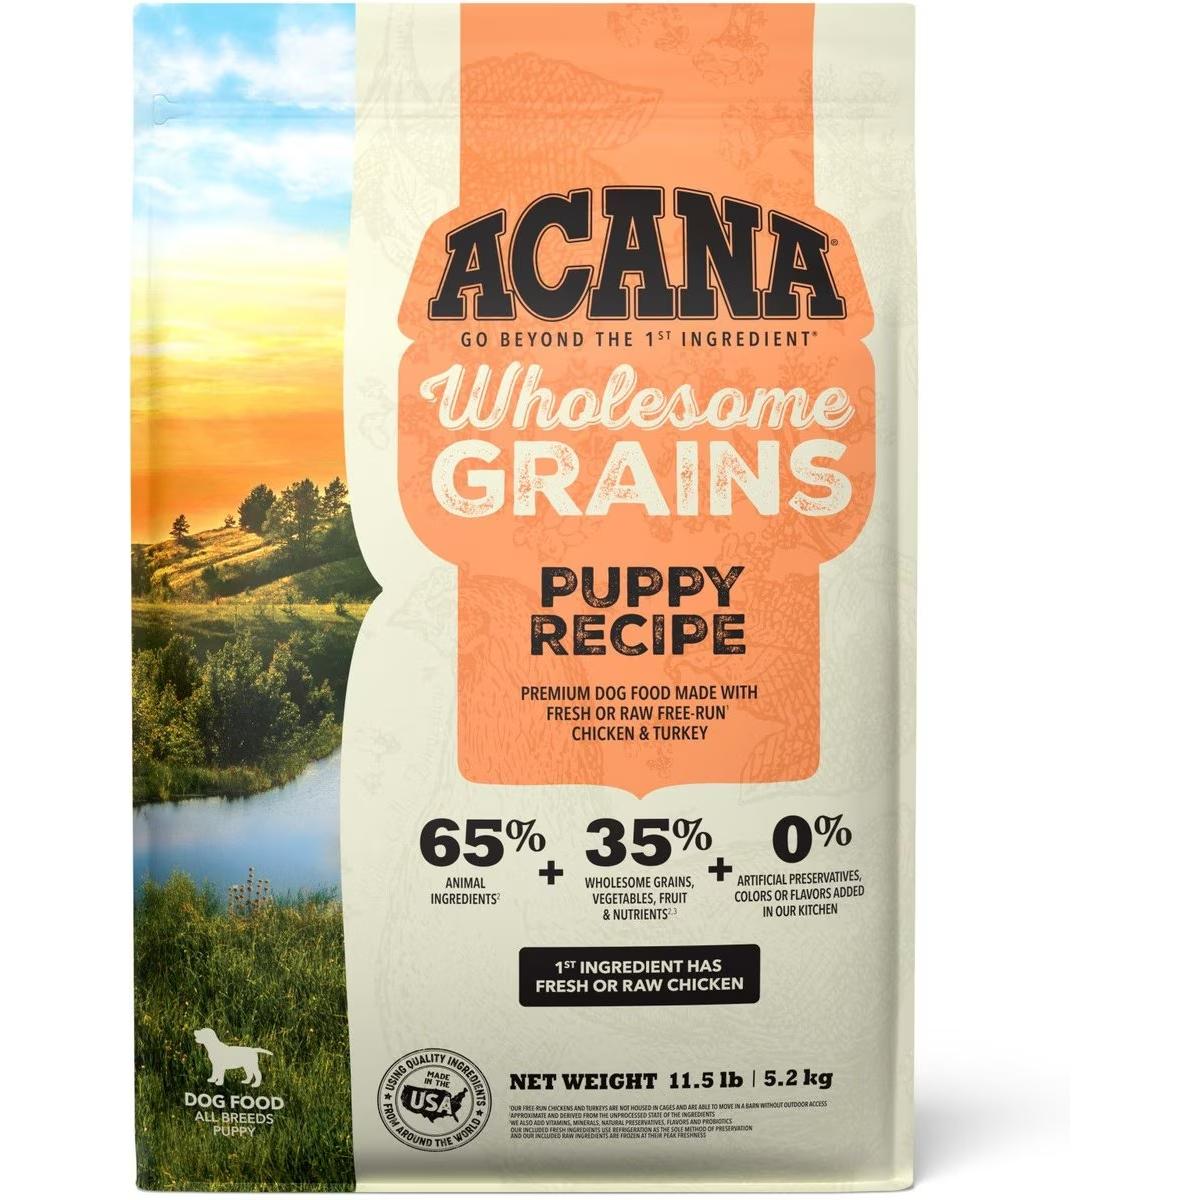 ACANA Wholesome Grains Puppy Recipe Dry Dog Food